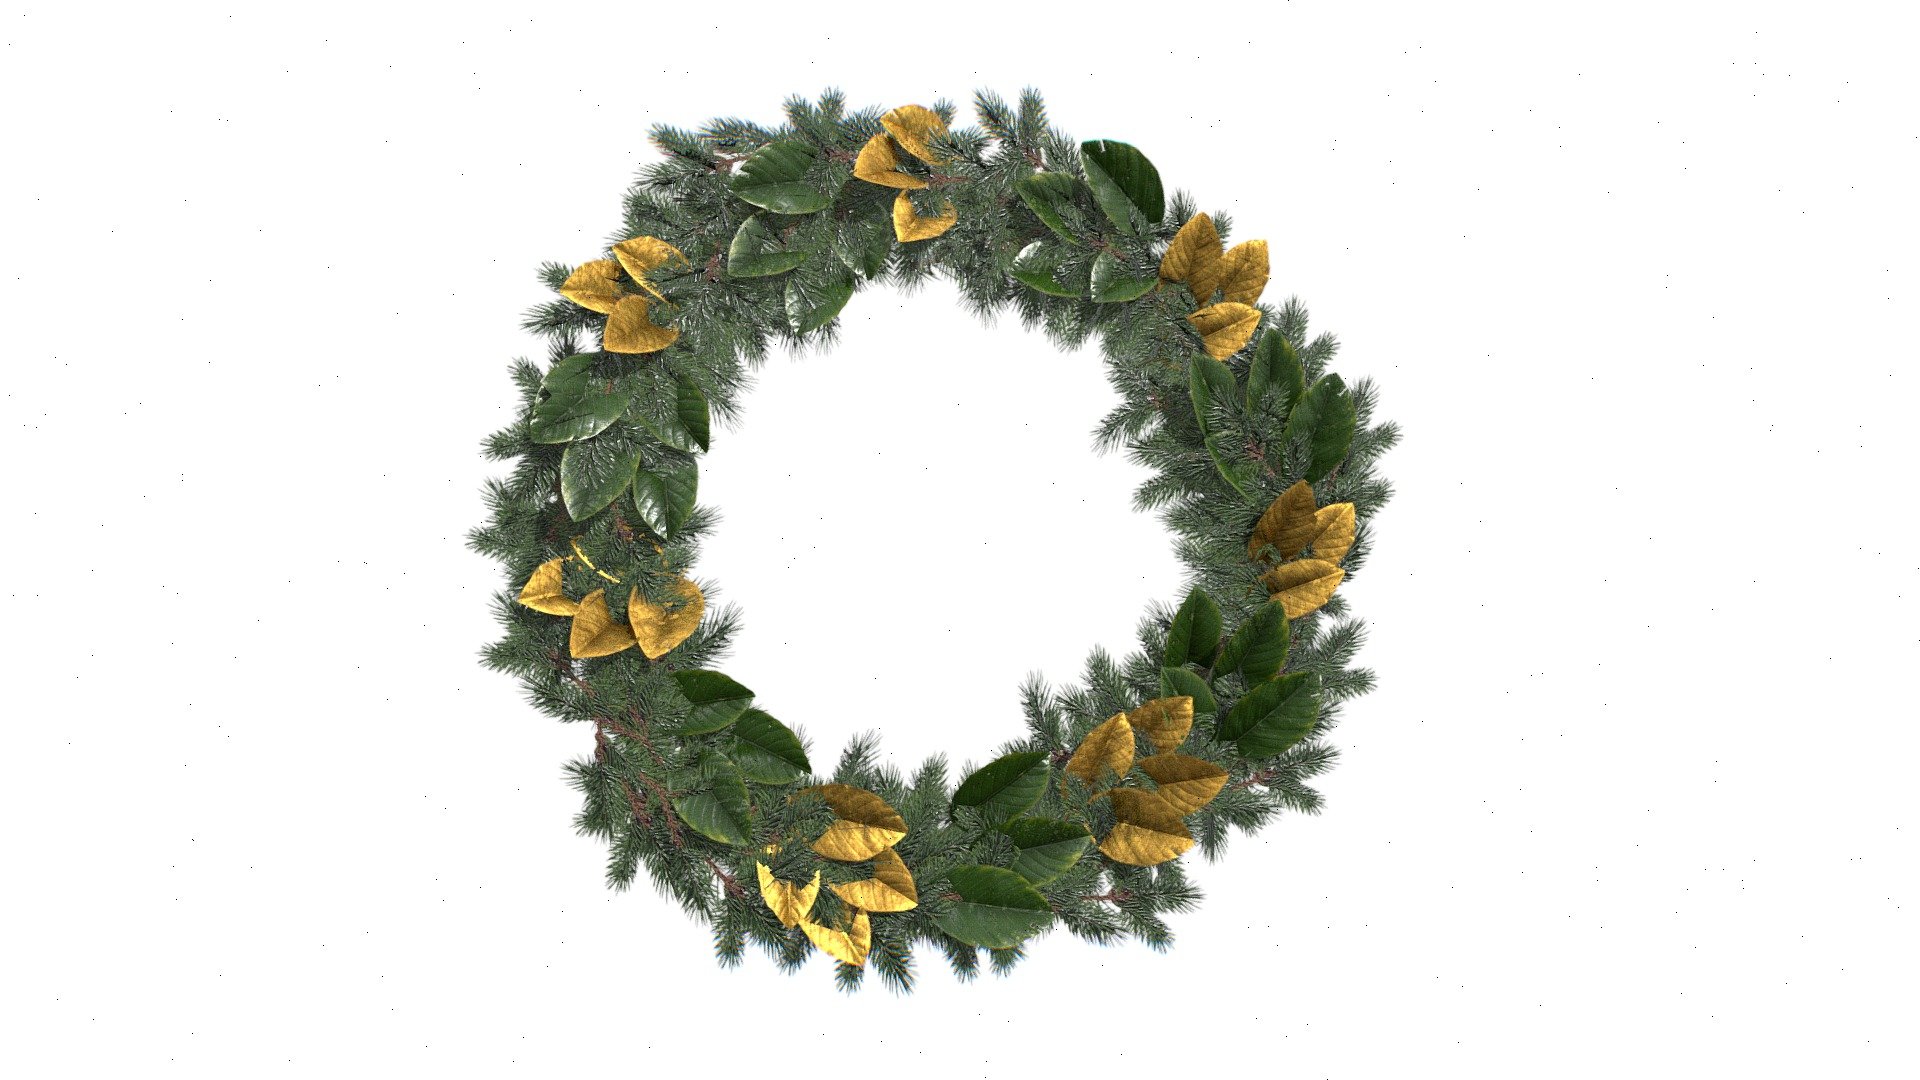 Lowpoly Christmas Wreath 3D Model

Fresh Evergreens with Gold Painted Magnolia Leaves 

HD Textures
PBR Materials
Low Poly model - Christmas Wreath With Golden Leaves - Buy Royalty Free 3D model by Omni Studio 3D (@omny3d) 3d model